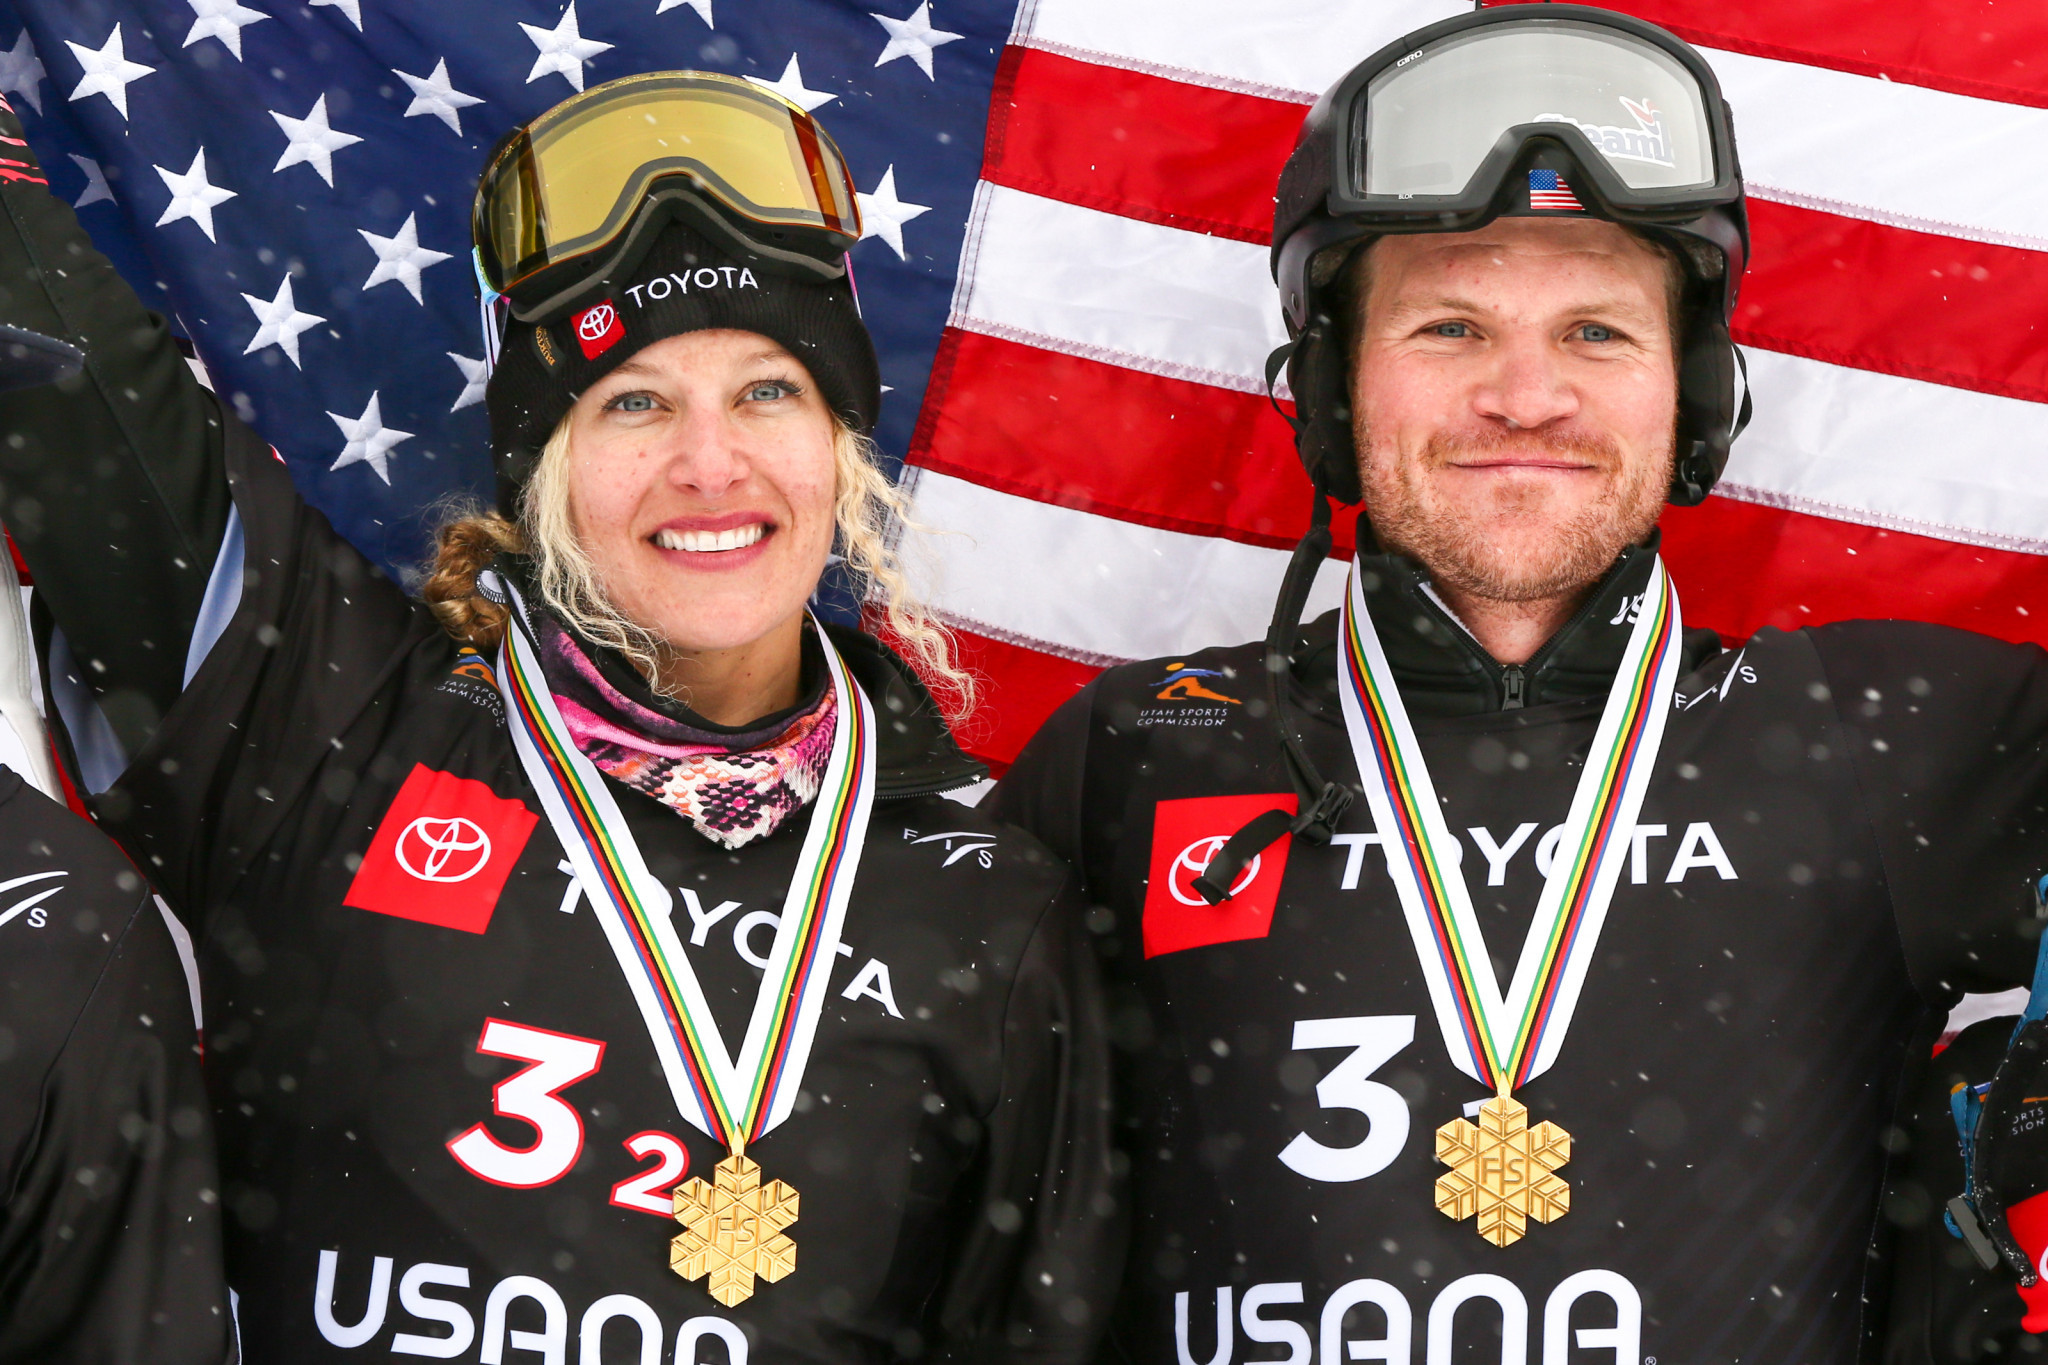 Dierdorff and Jacobellis combine to win first mixed team snowboard cross title at World Championships